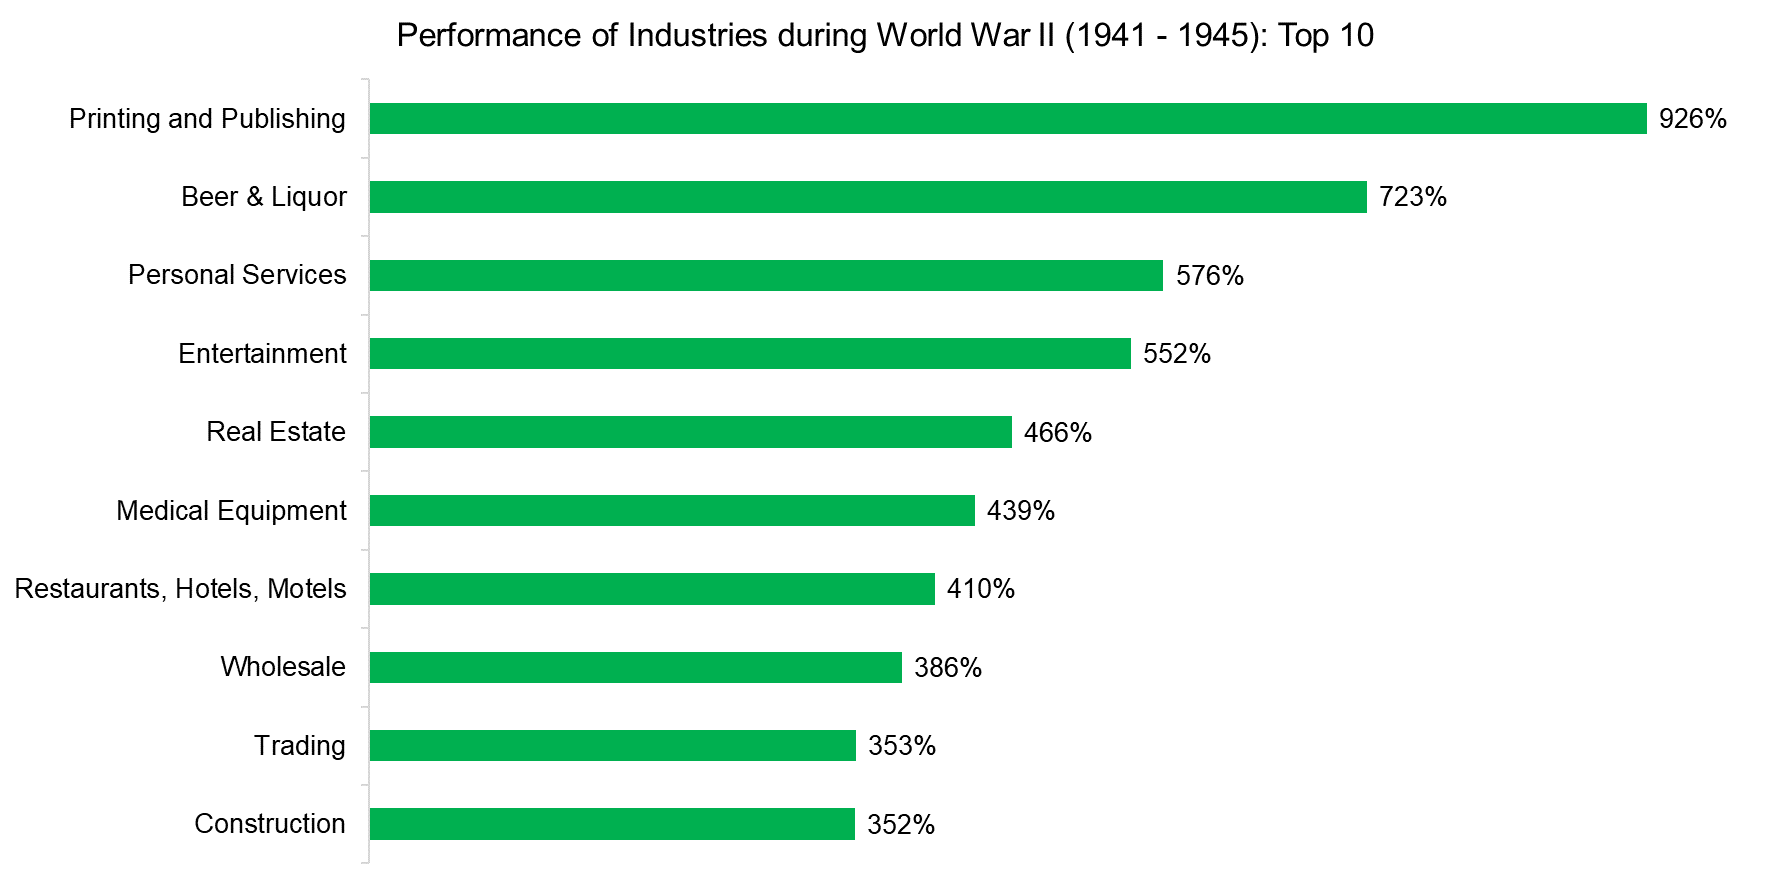 Performance of Industries during World War II (1941 - 1945) Top 10